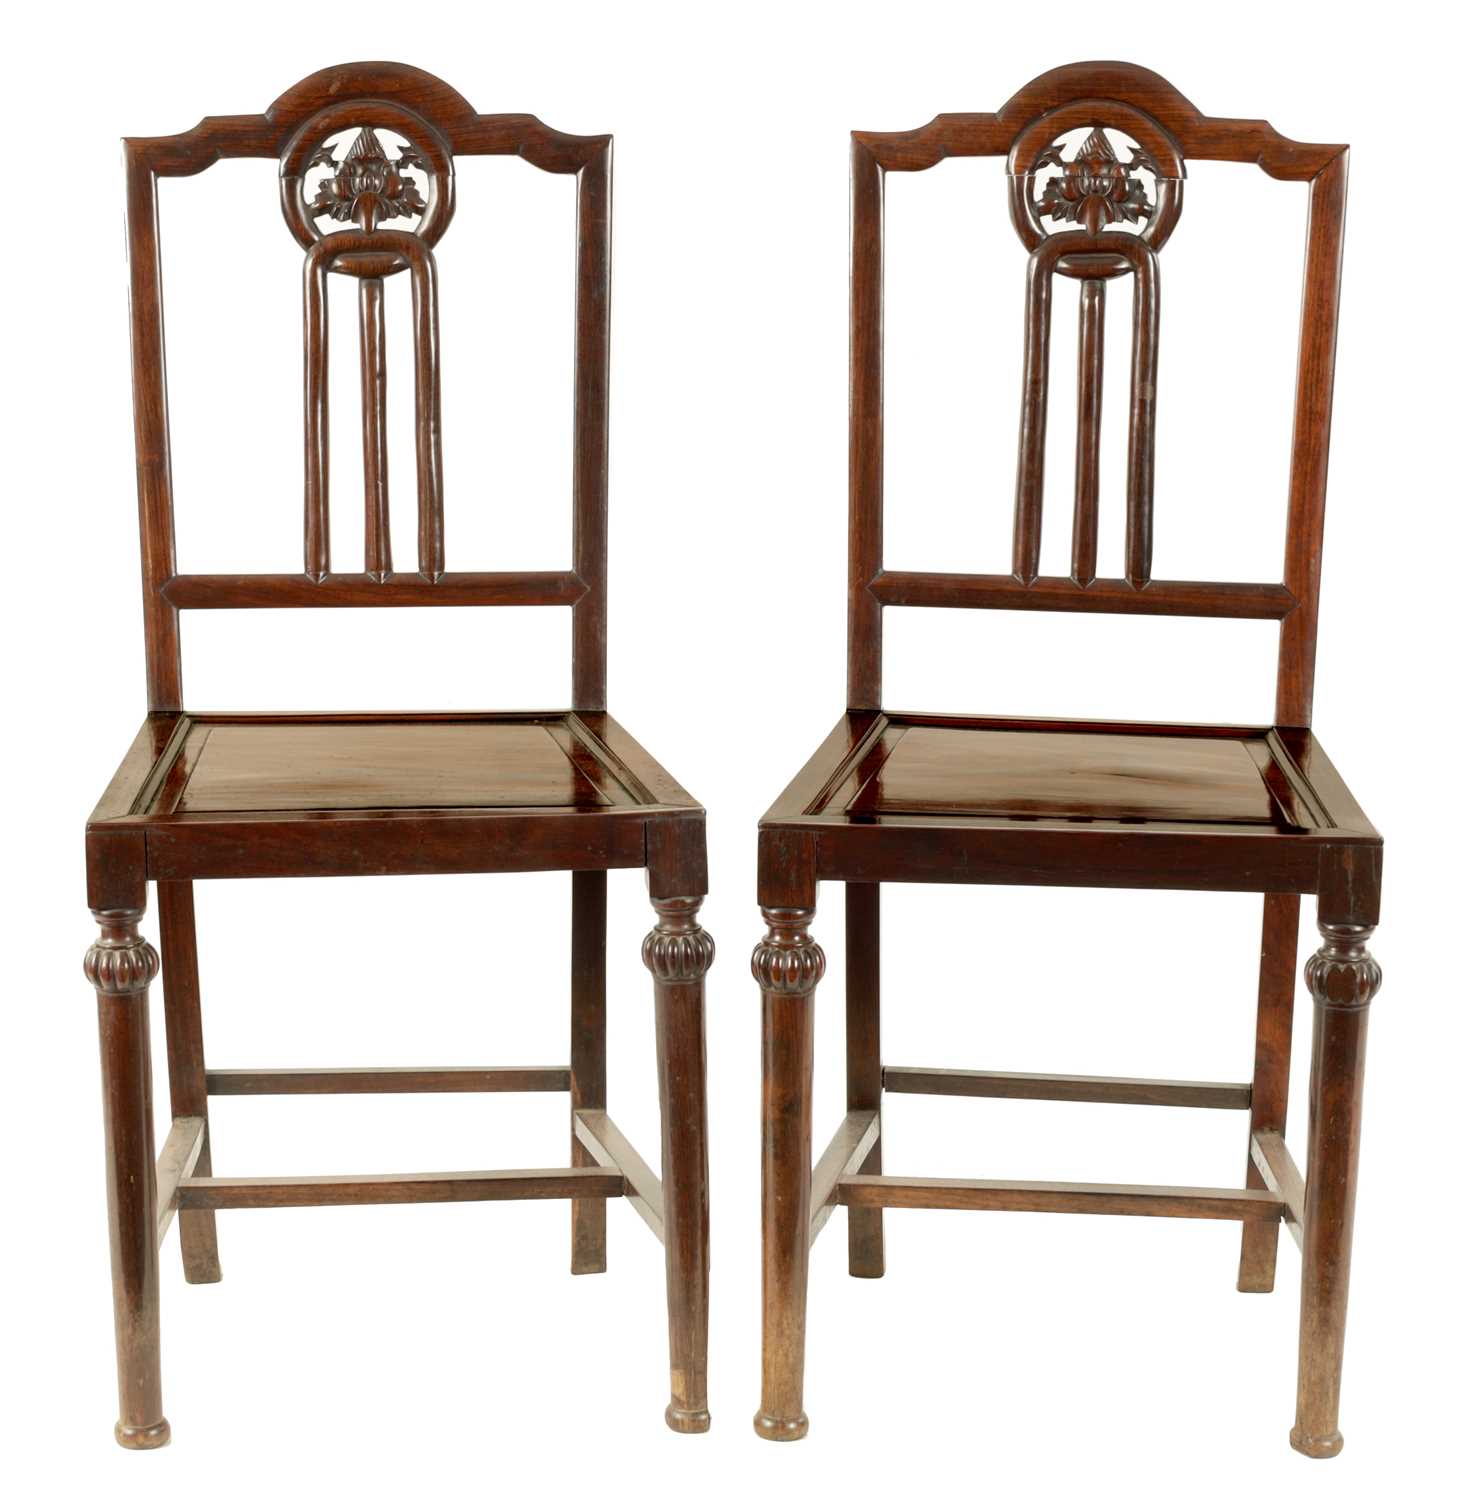 A GOOD PAIR OF 19TH CENTURY CHINESE HARDWOOD SIDE CHAIRS